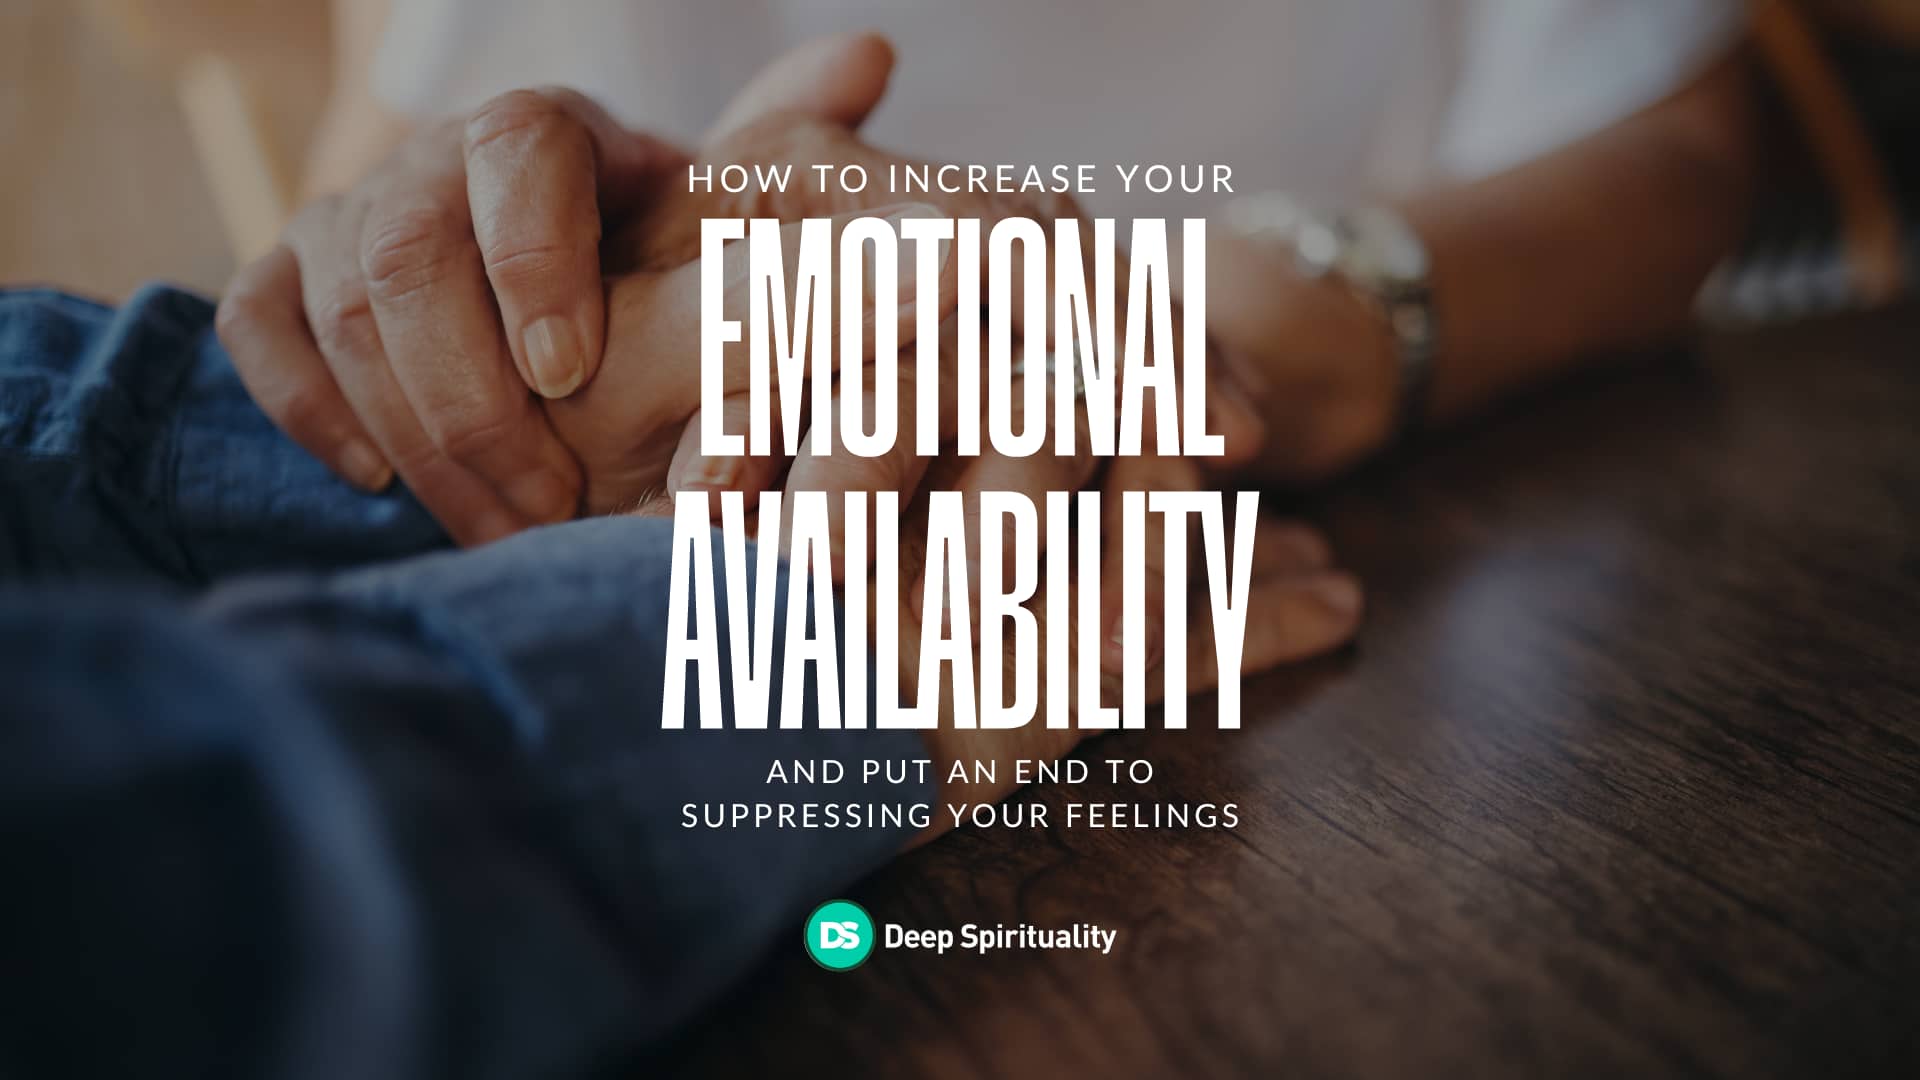 How to Increase Your Emotional Availability and Put an End to Suppressing Your Feelings 5